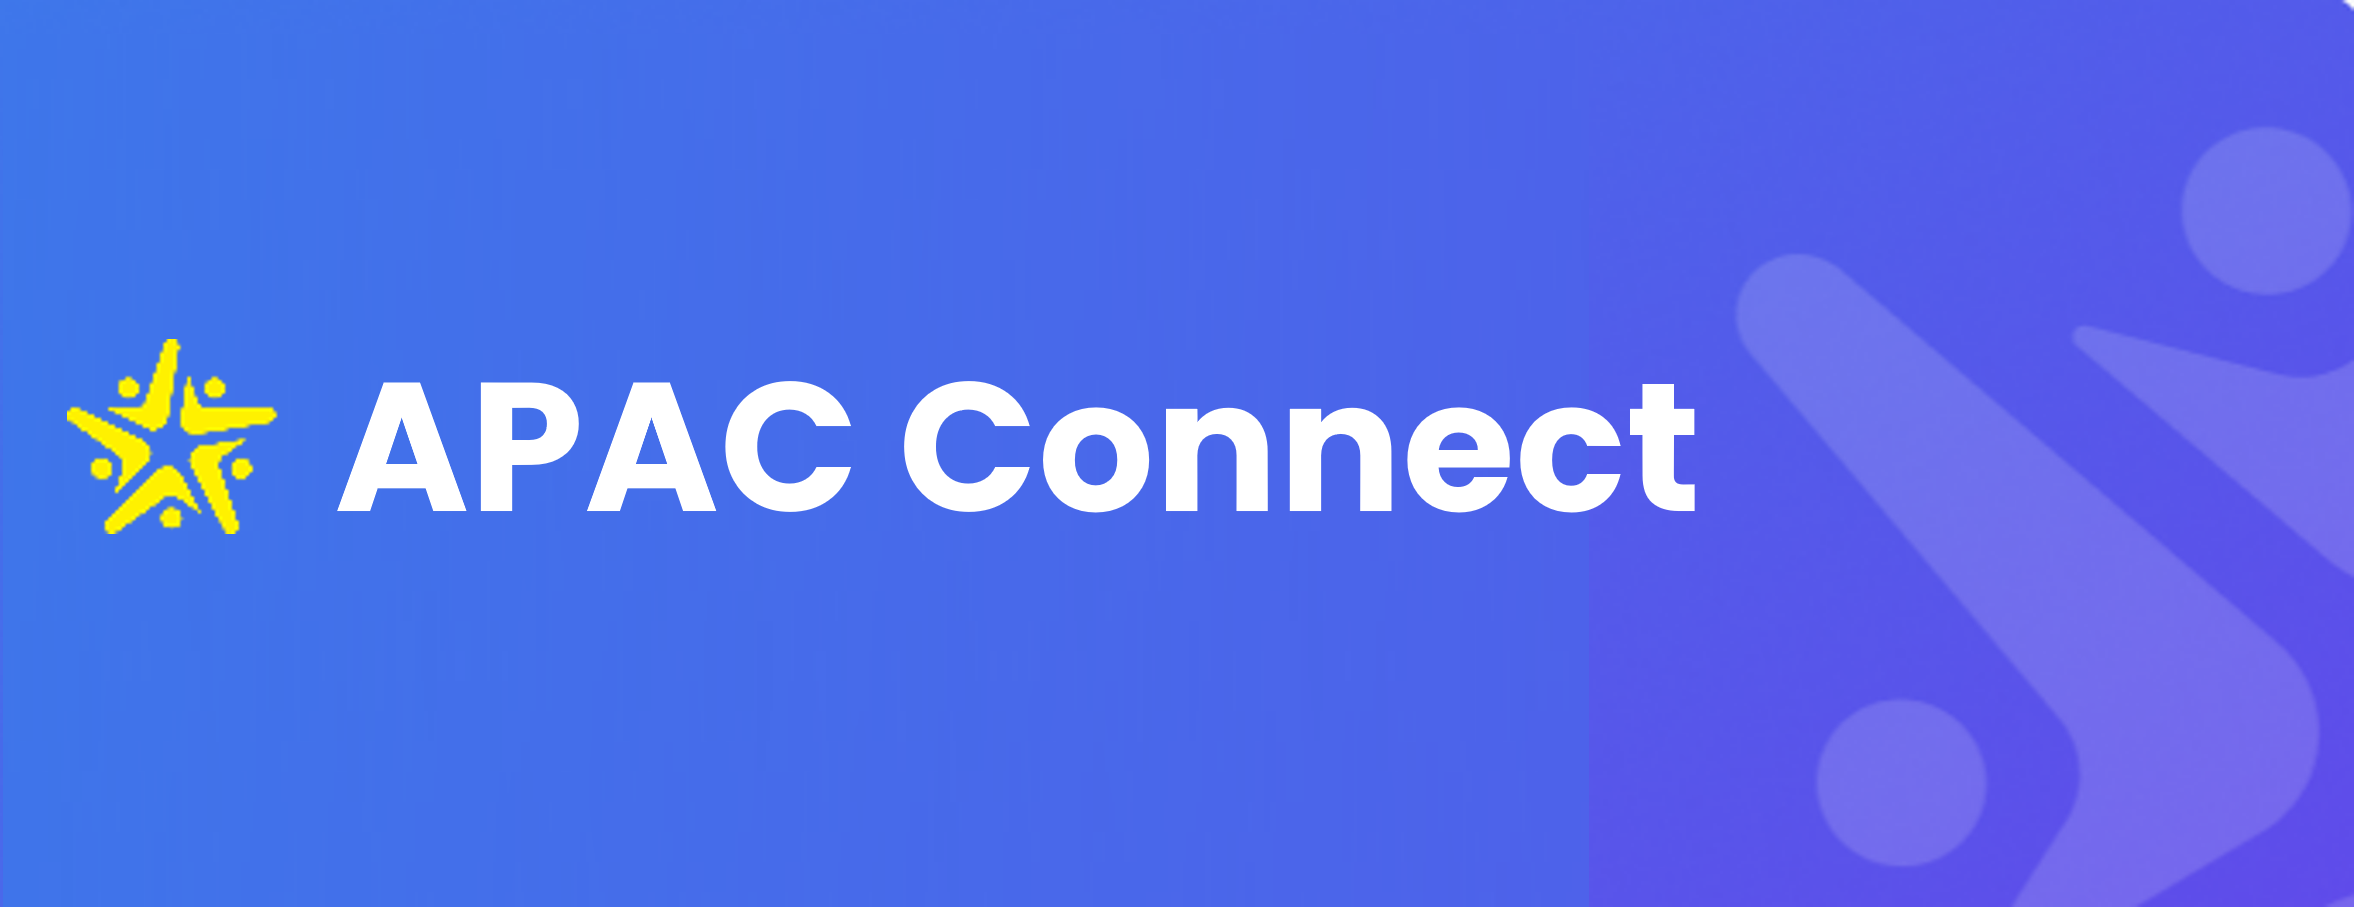 APAC Connect